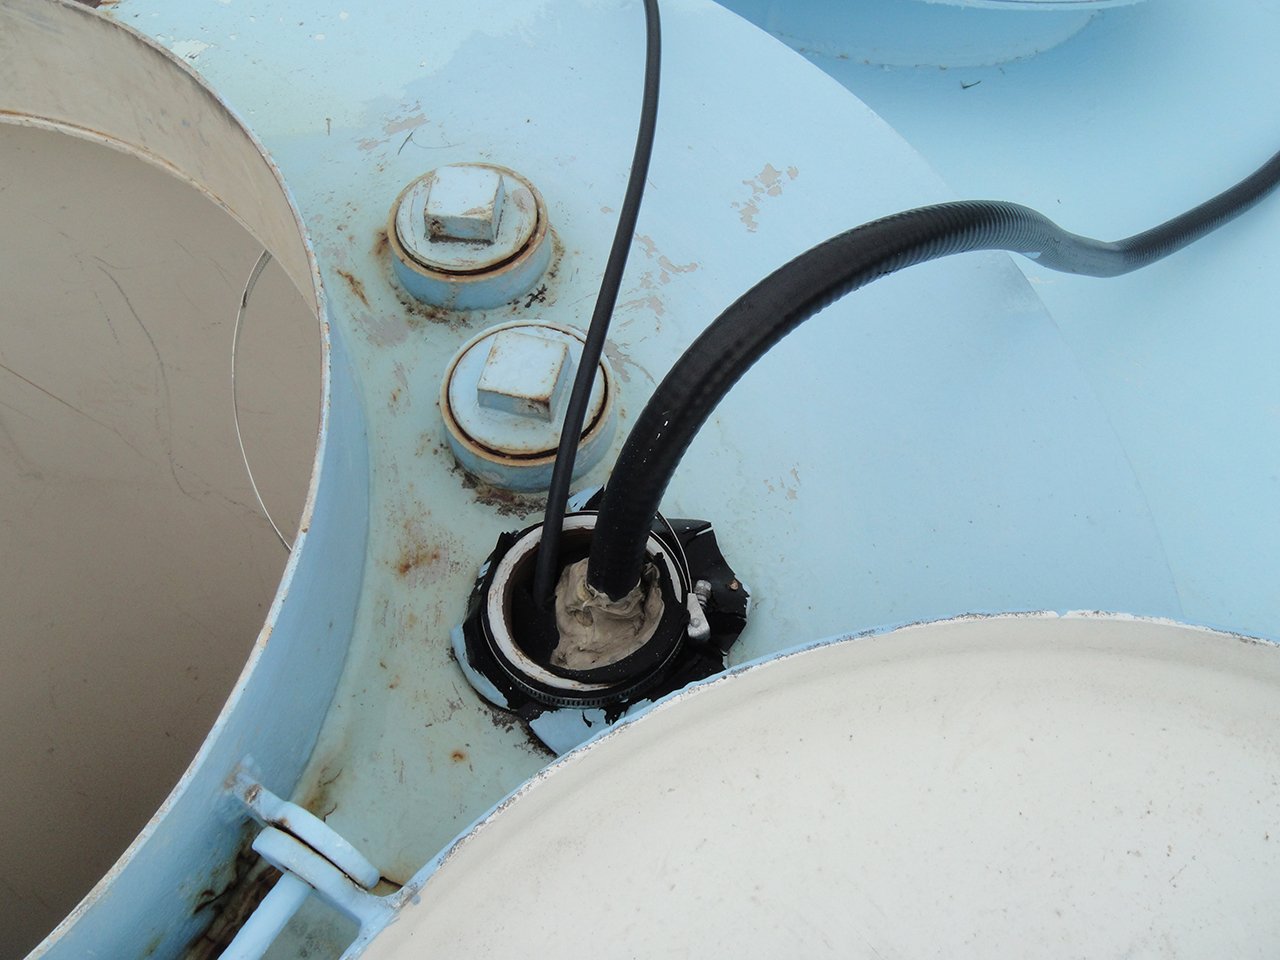 telecom cables enter the top of the tank near the access hatch